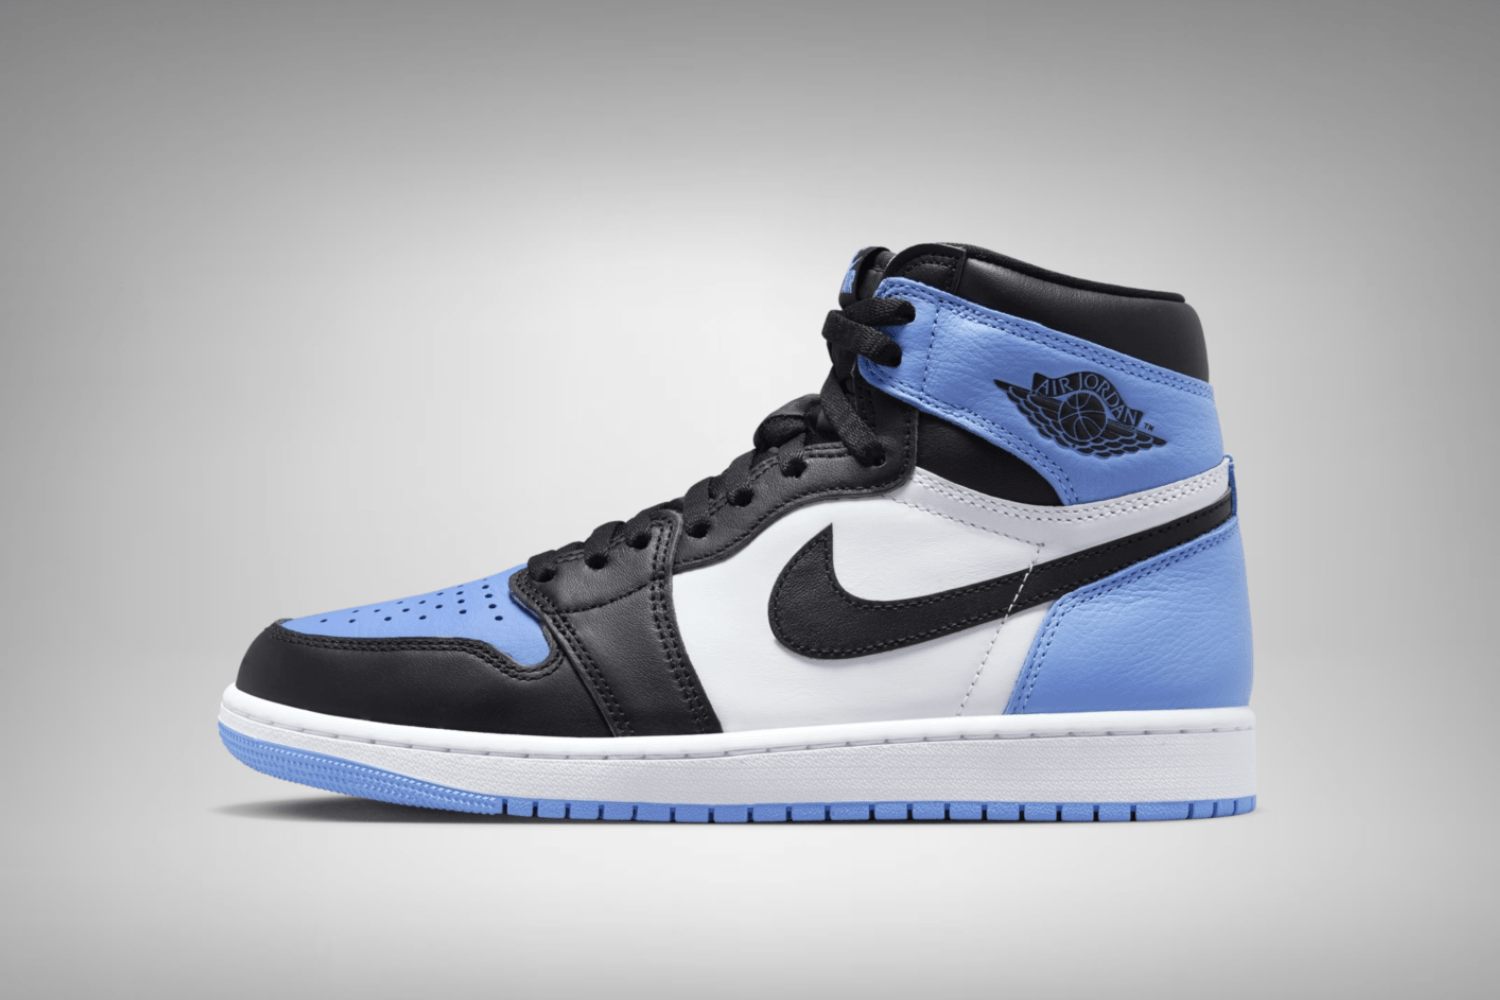 Nike shows official images of the Air Jordan 1 Retro High OG 'UNC Toe'